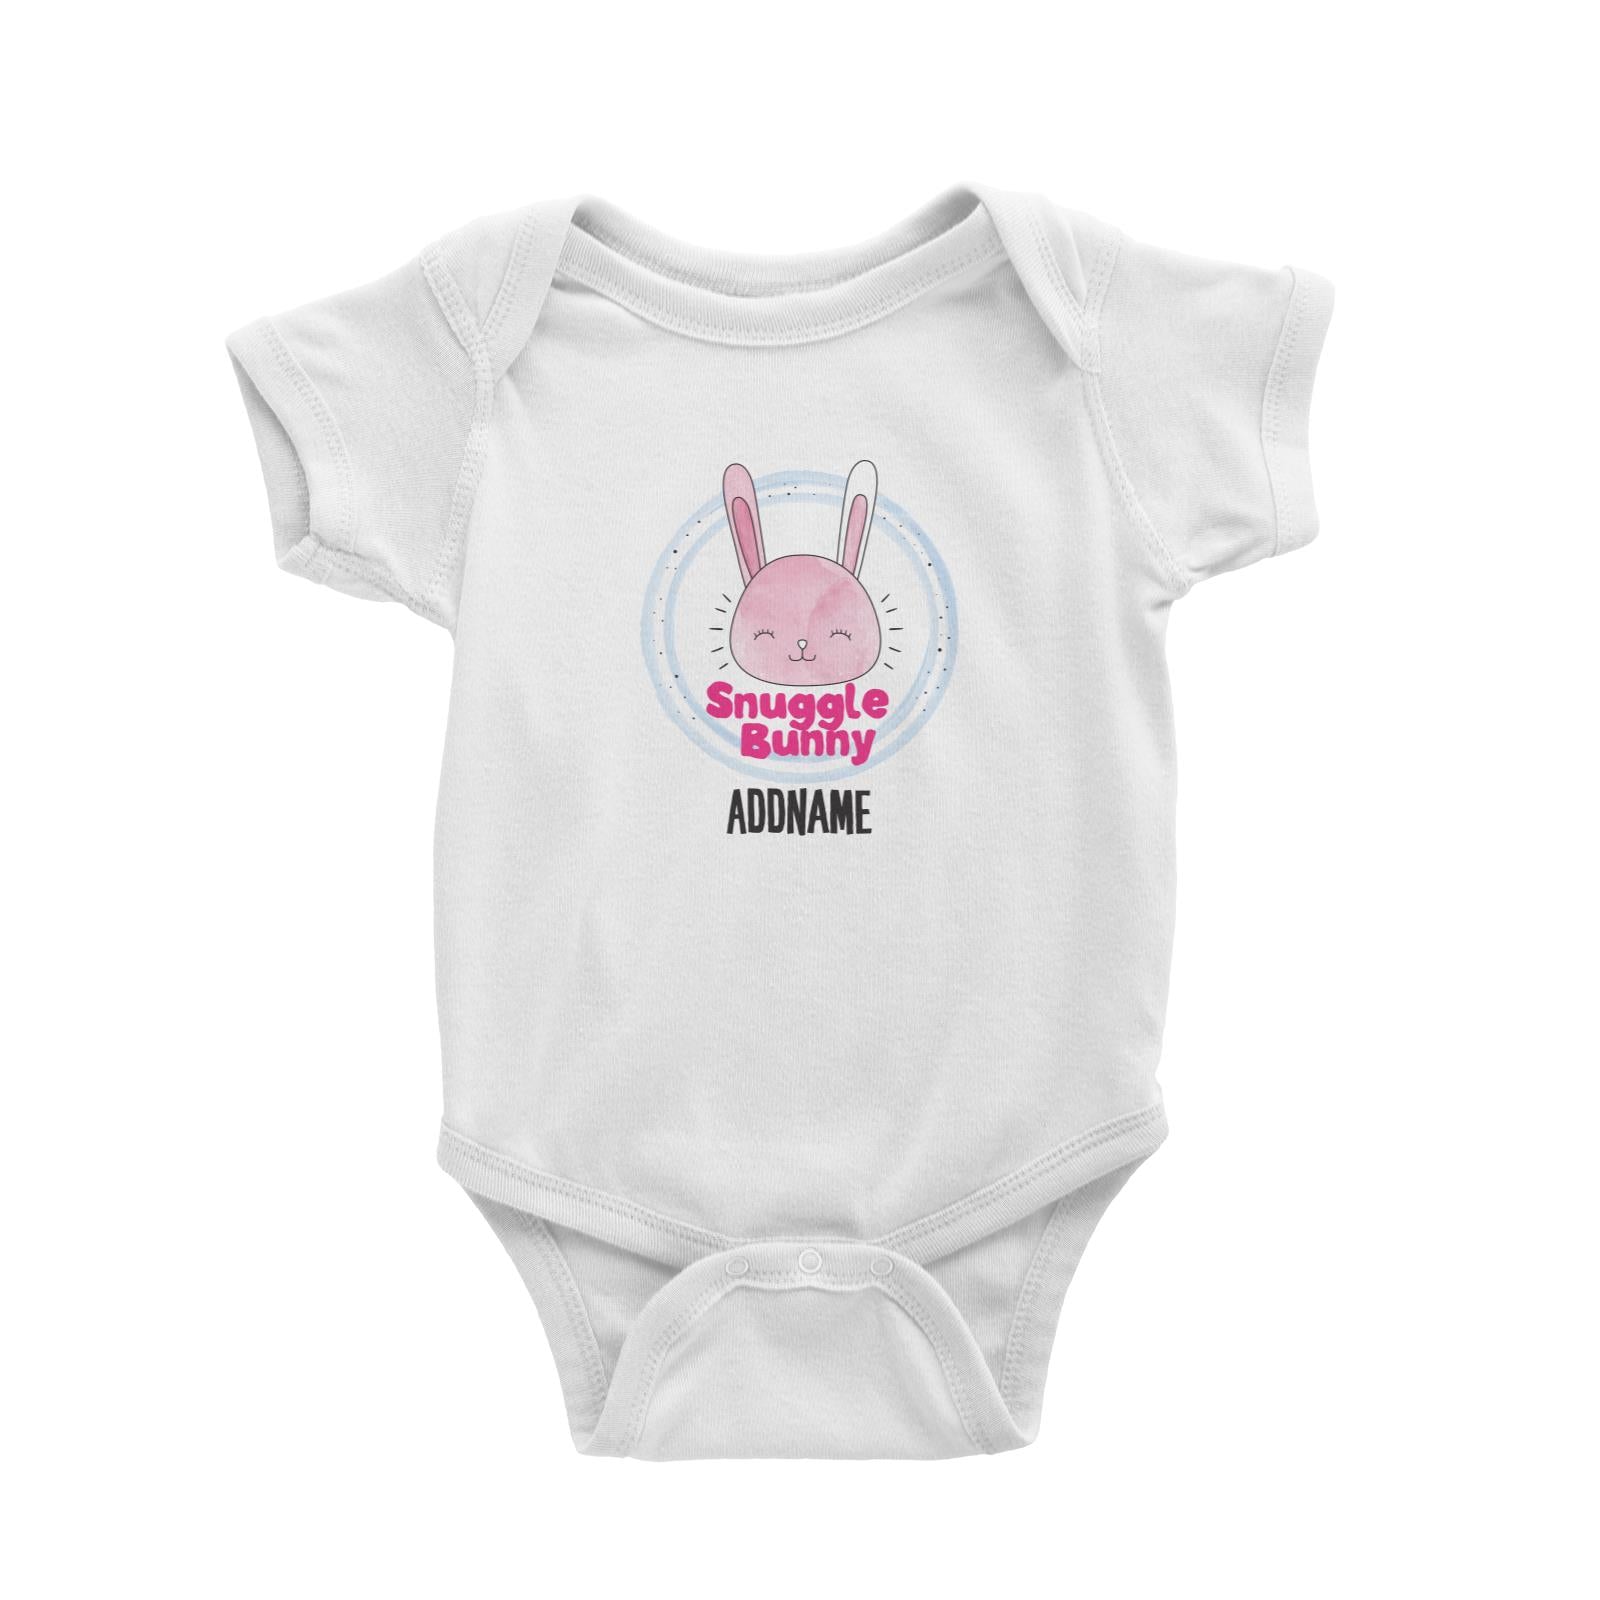 Cool Vibrant Series Snuggle Bunny Addname Baby Romper [SALE]